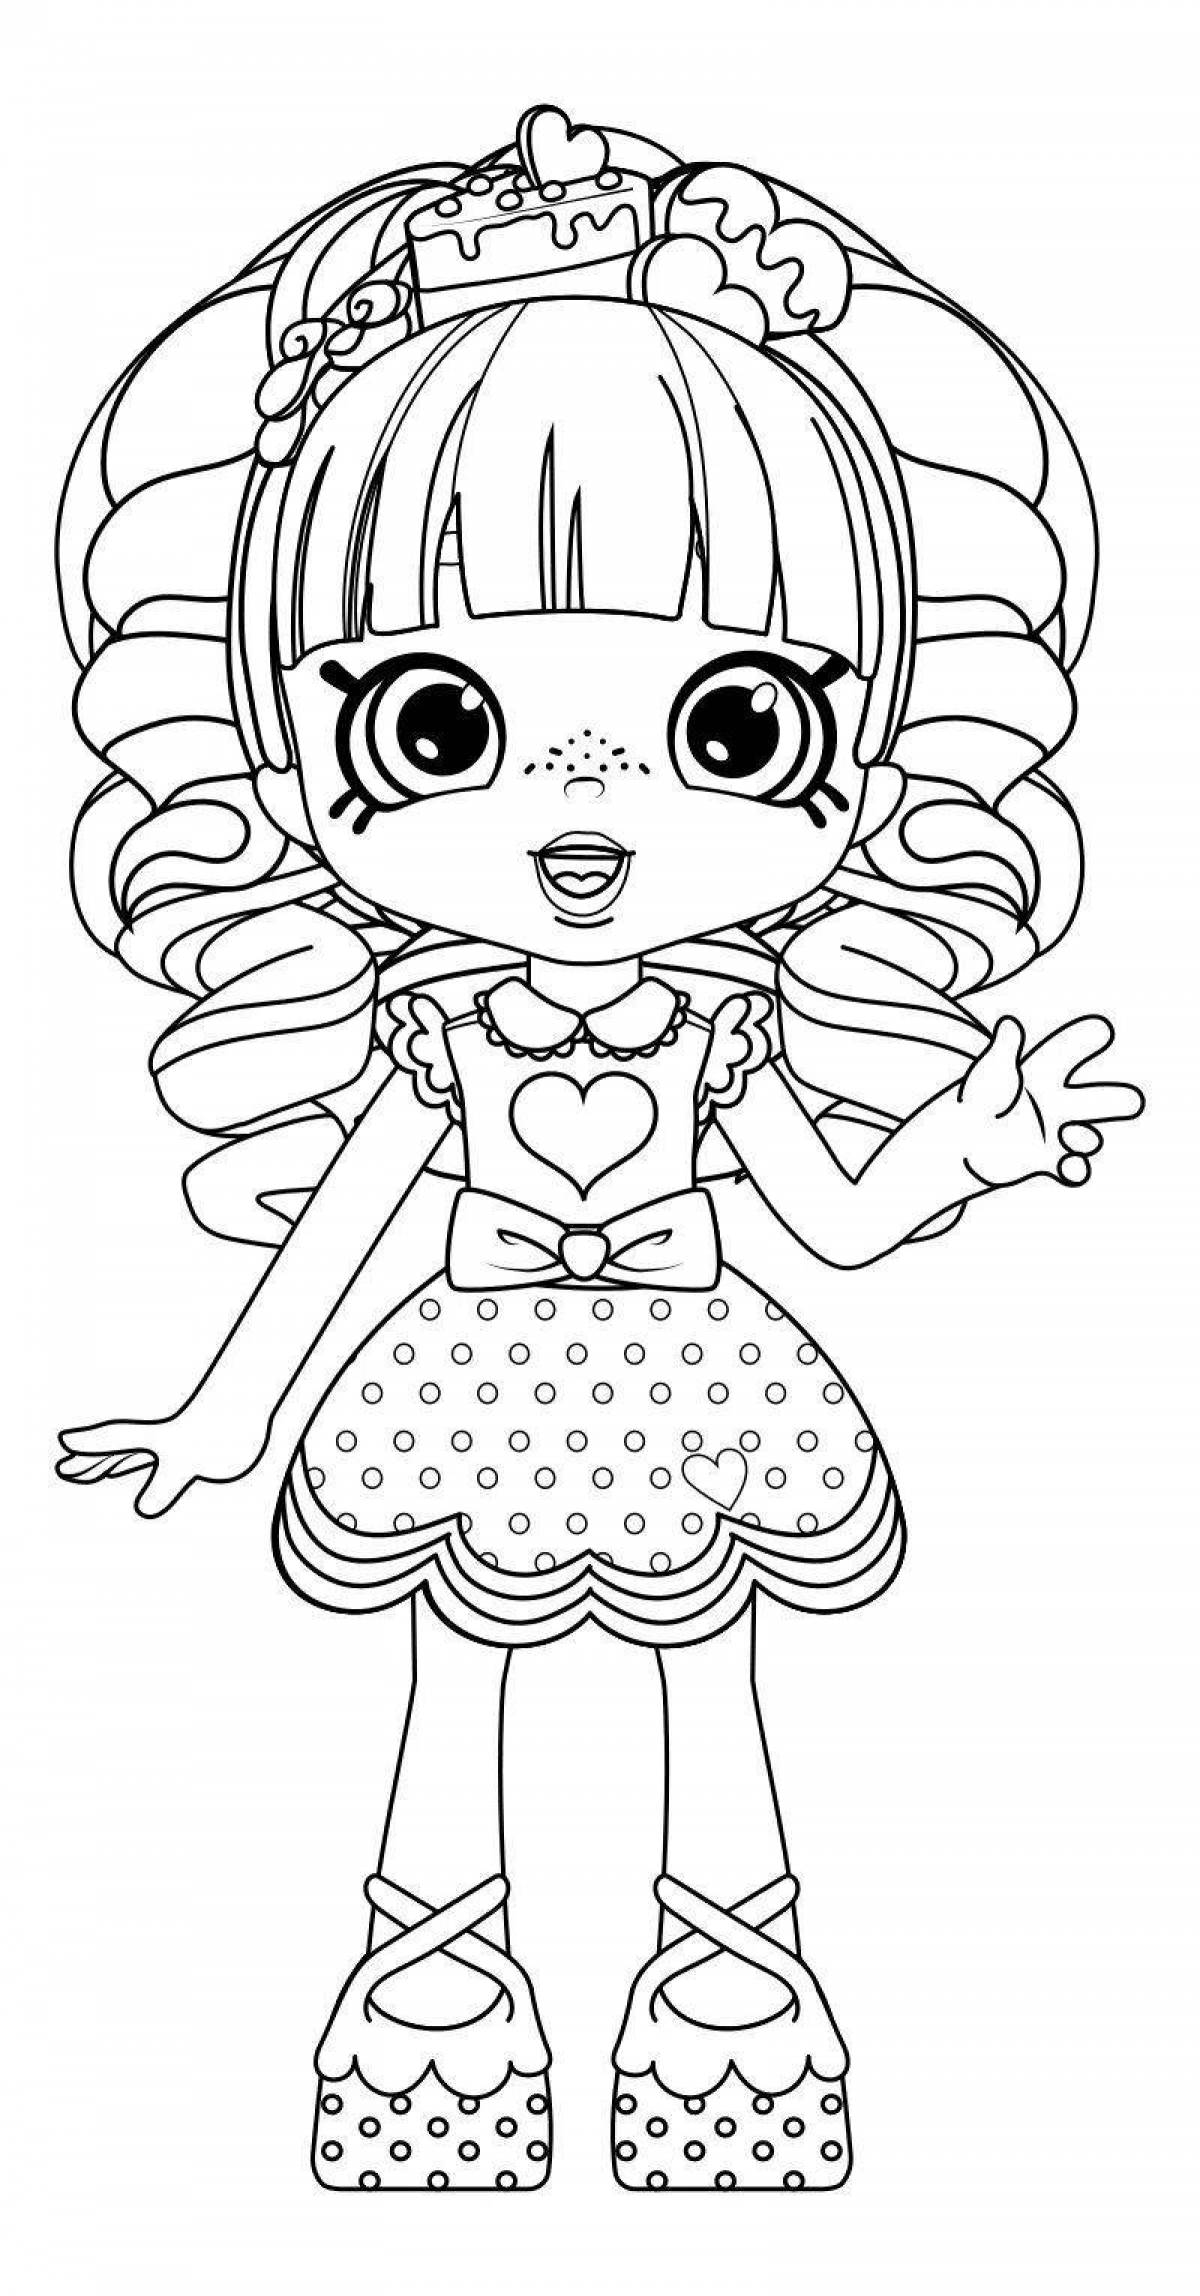 Color-explosion kindi kids coloring page